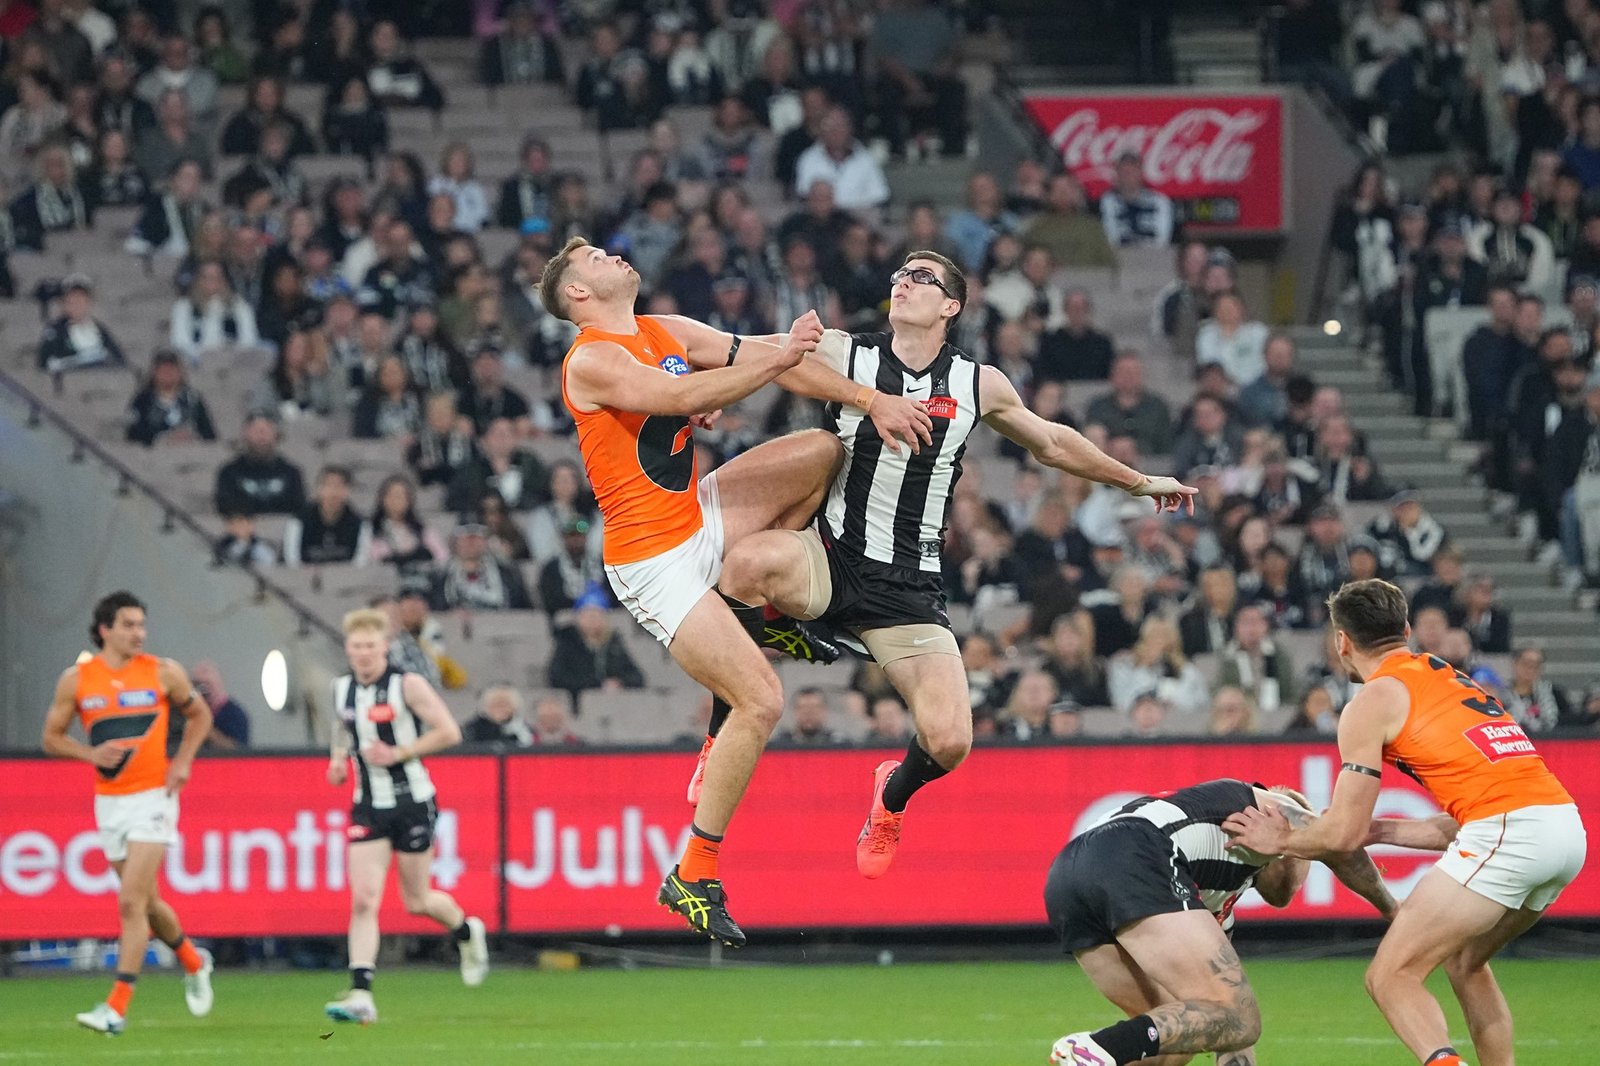 Live: Magpies take on in-form Giants at packed MCG for a spot in the AFL grand final